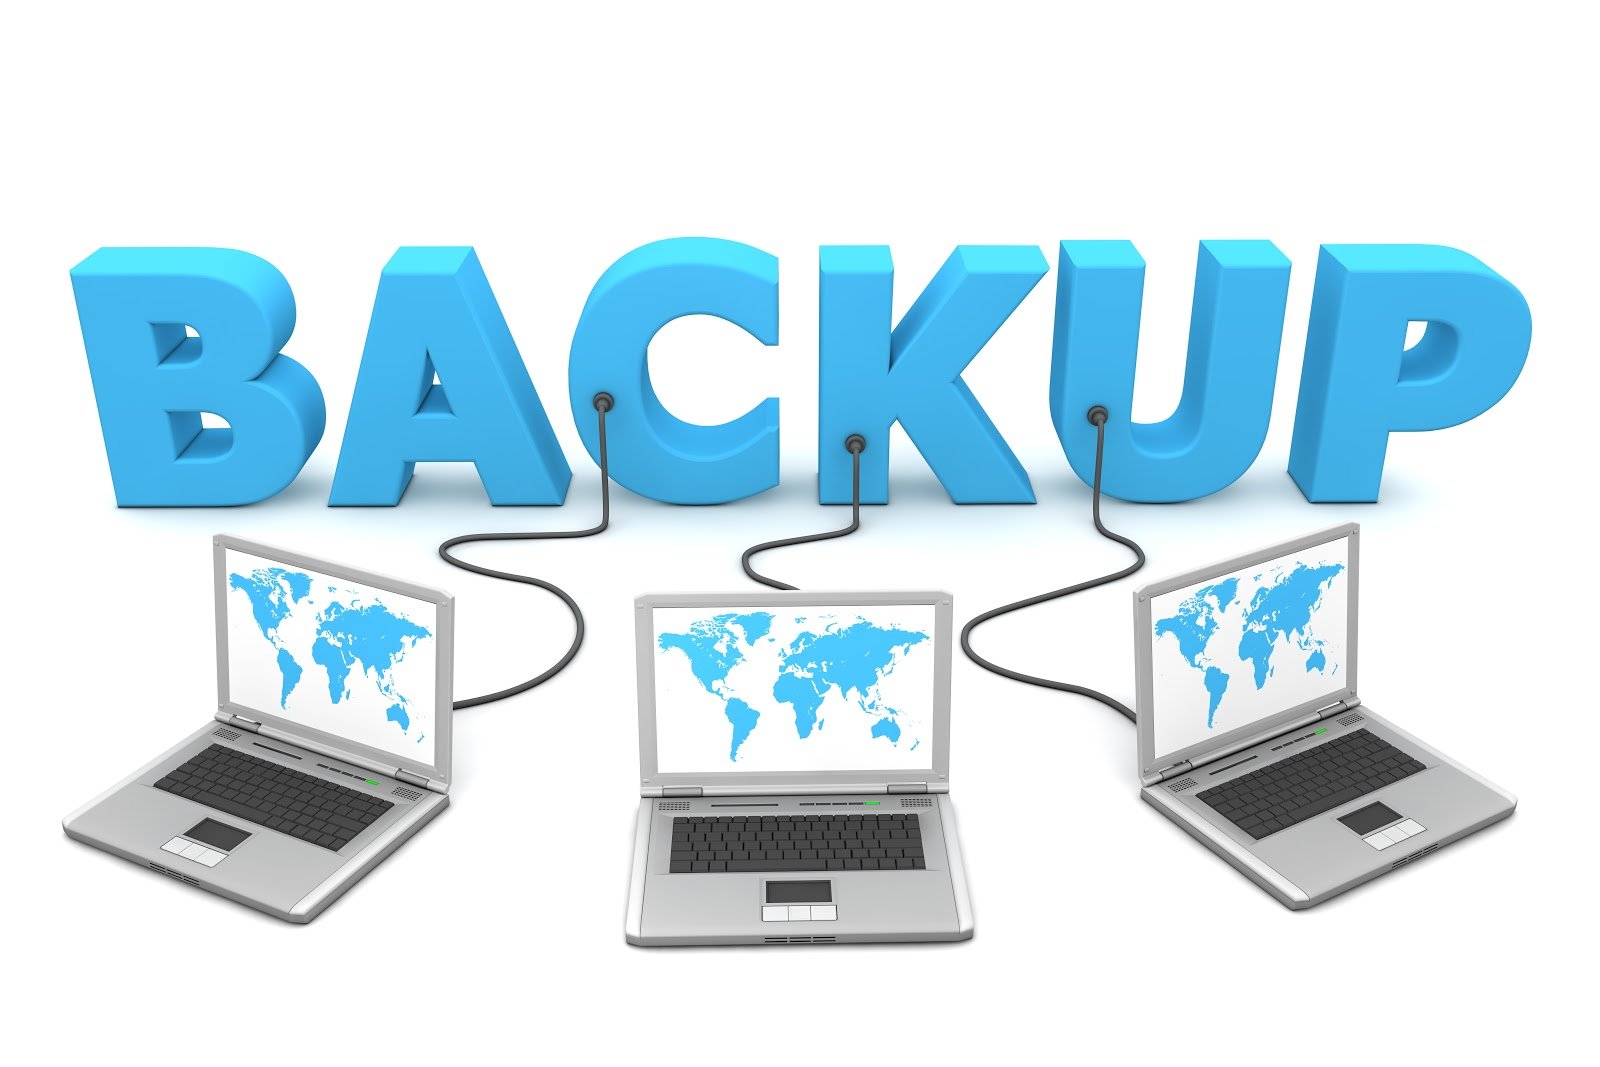 Back up your data regularly